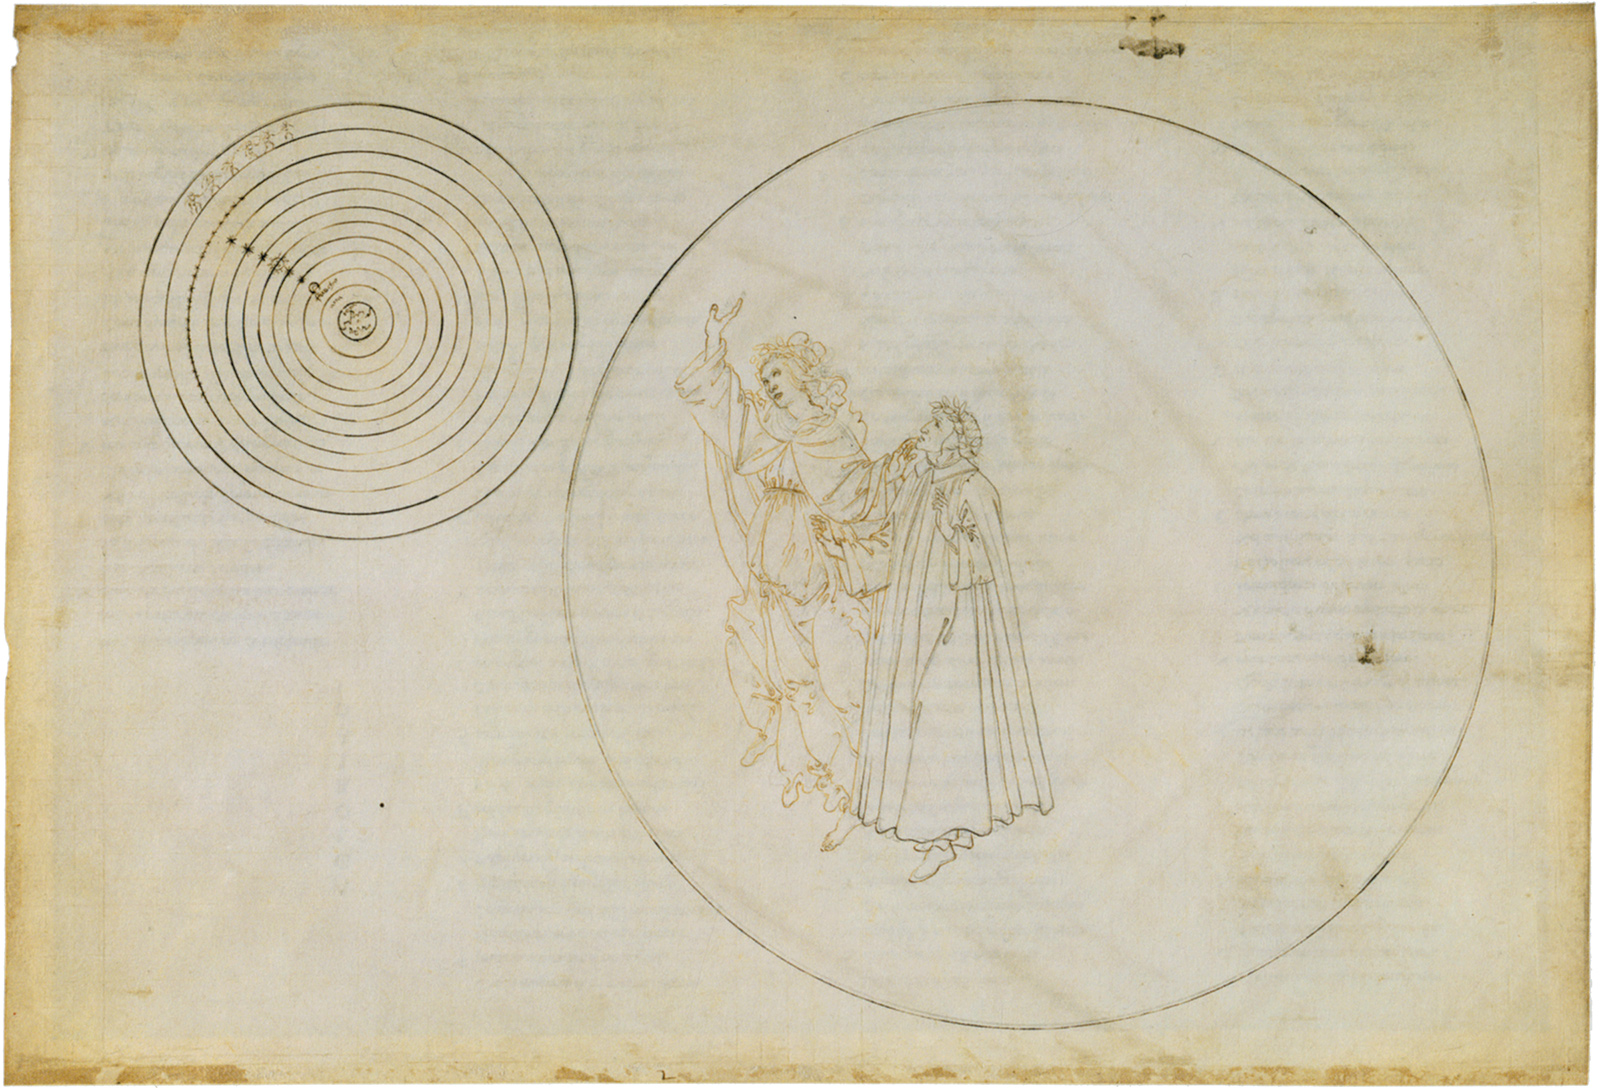 ‘Paradiso II’; Dante and Beatrice in the sphere of the moon, with Beatrice explaining the nature of the heavens; illustration by Sandro Botticelli, circa 1490